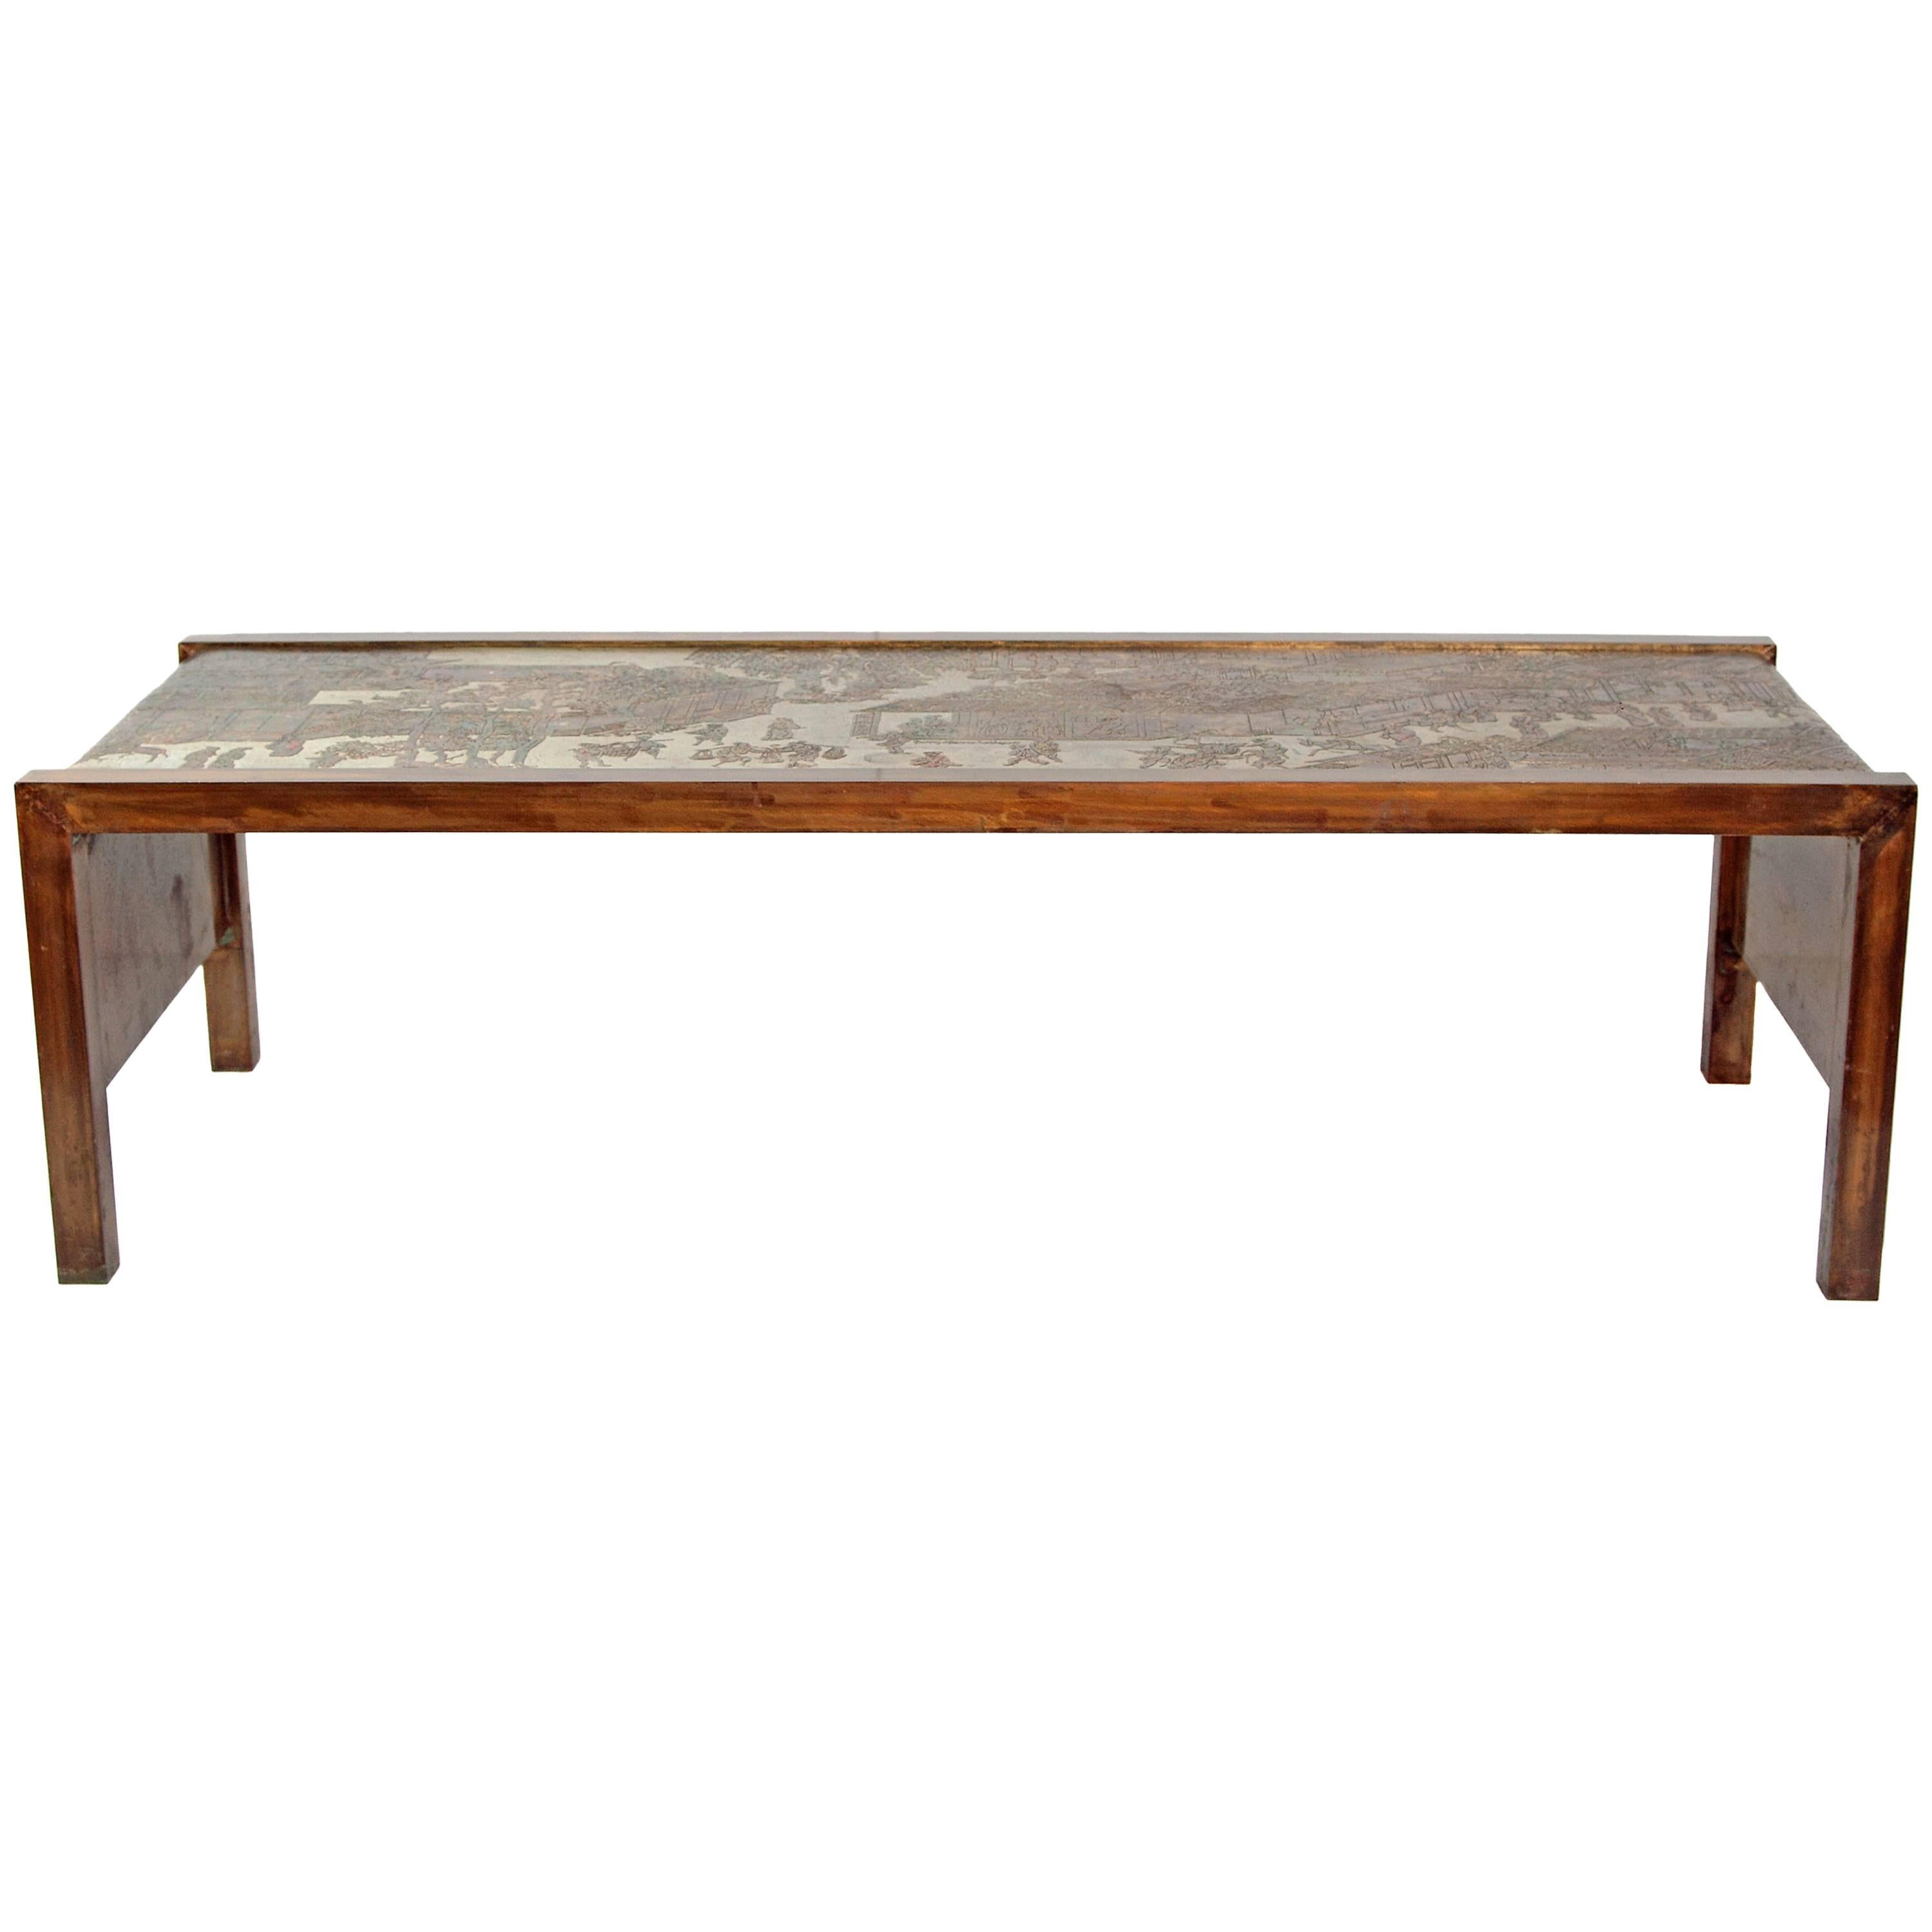 Midcentury Waterfall Cocktail or Coffee Table by Philip and Kelvin LaVerne